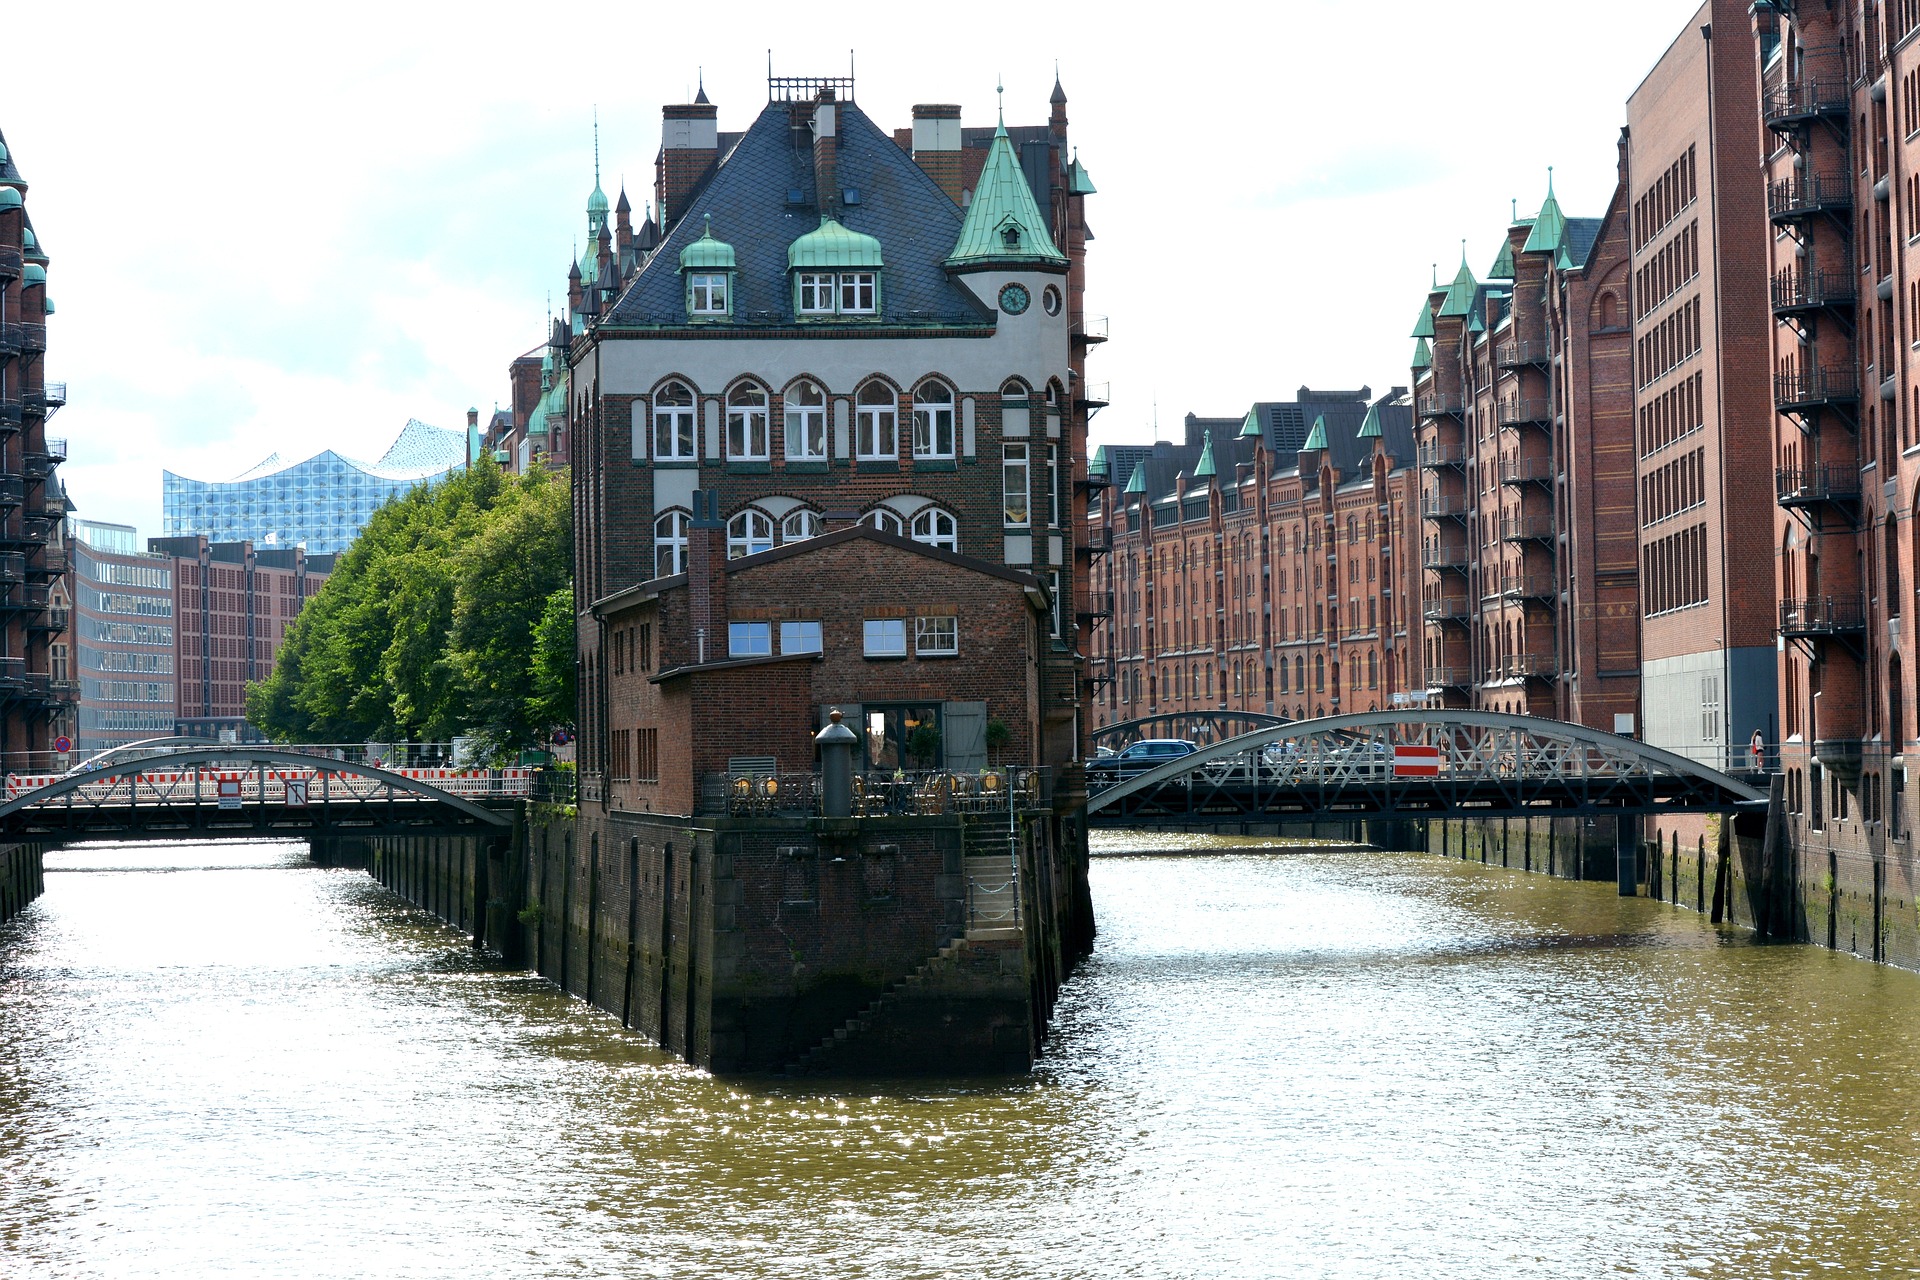 The famous Speicherstadt district is a landmark of the Hanseatic city of Hamburg.